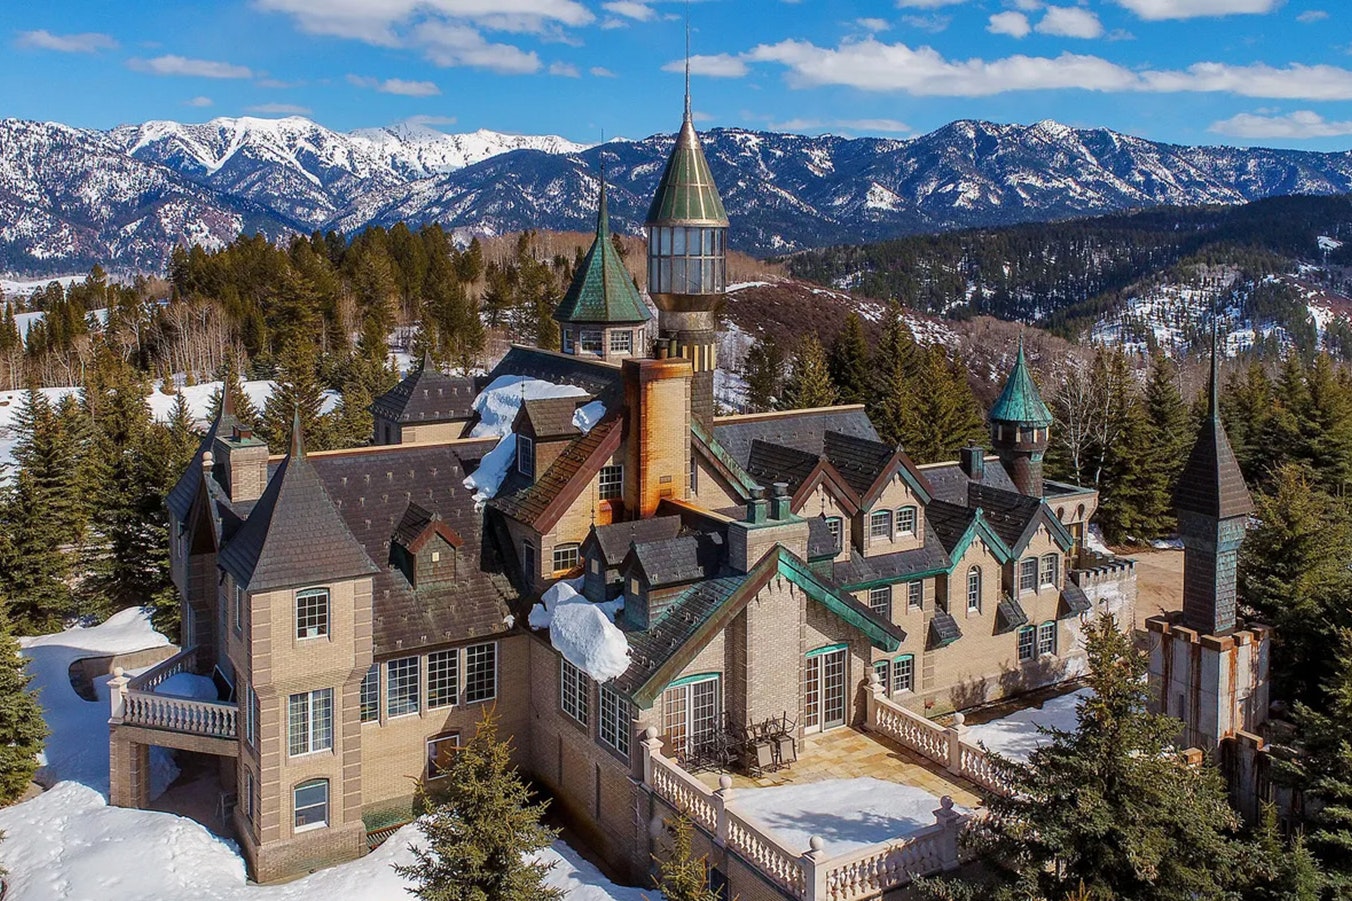 The exterior of the famous Bedford Castle in Wyoming is every bit a fairy tale, including appropriate architecture around the 40-acre grounds.